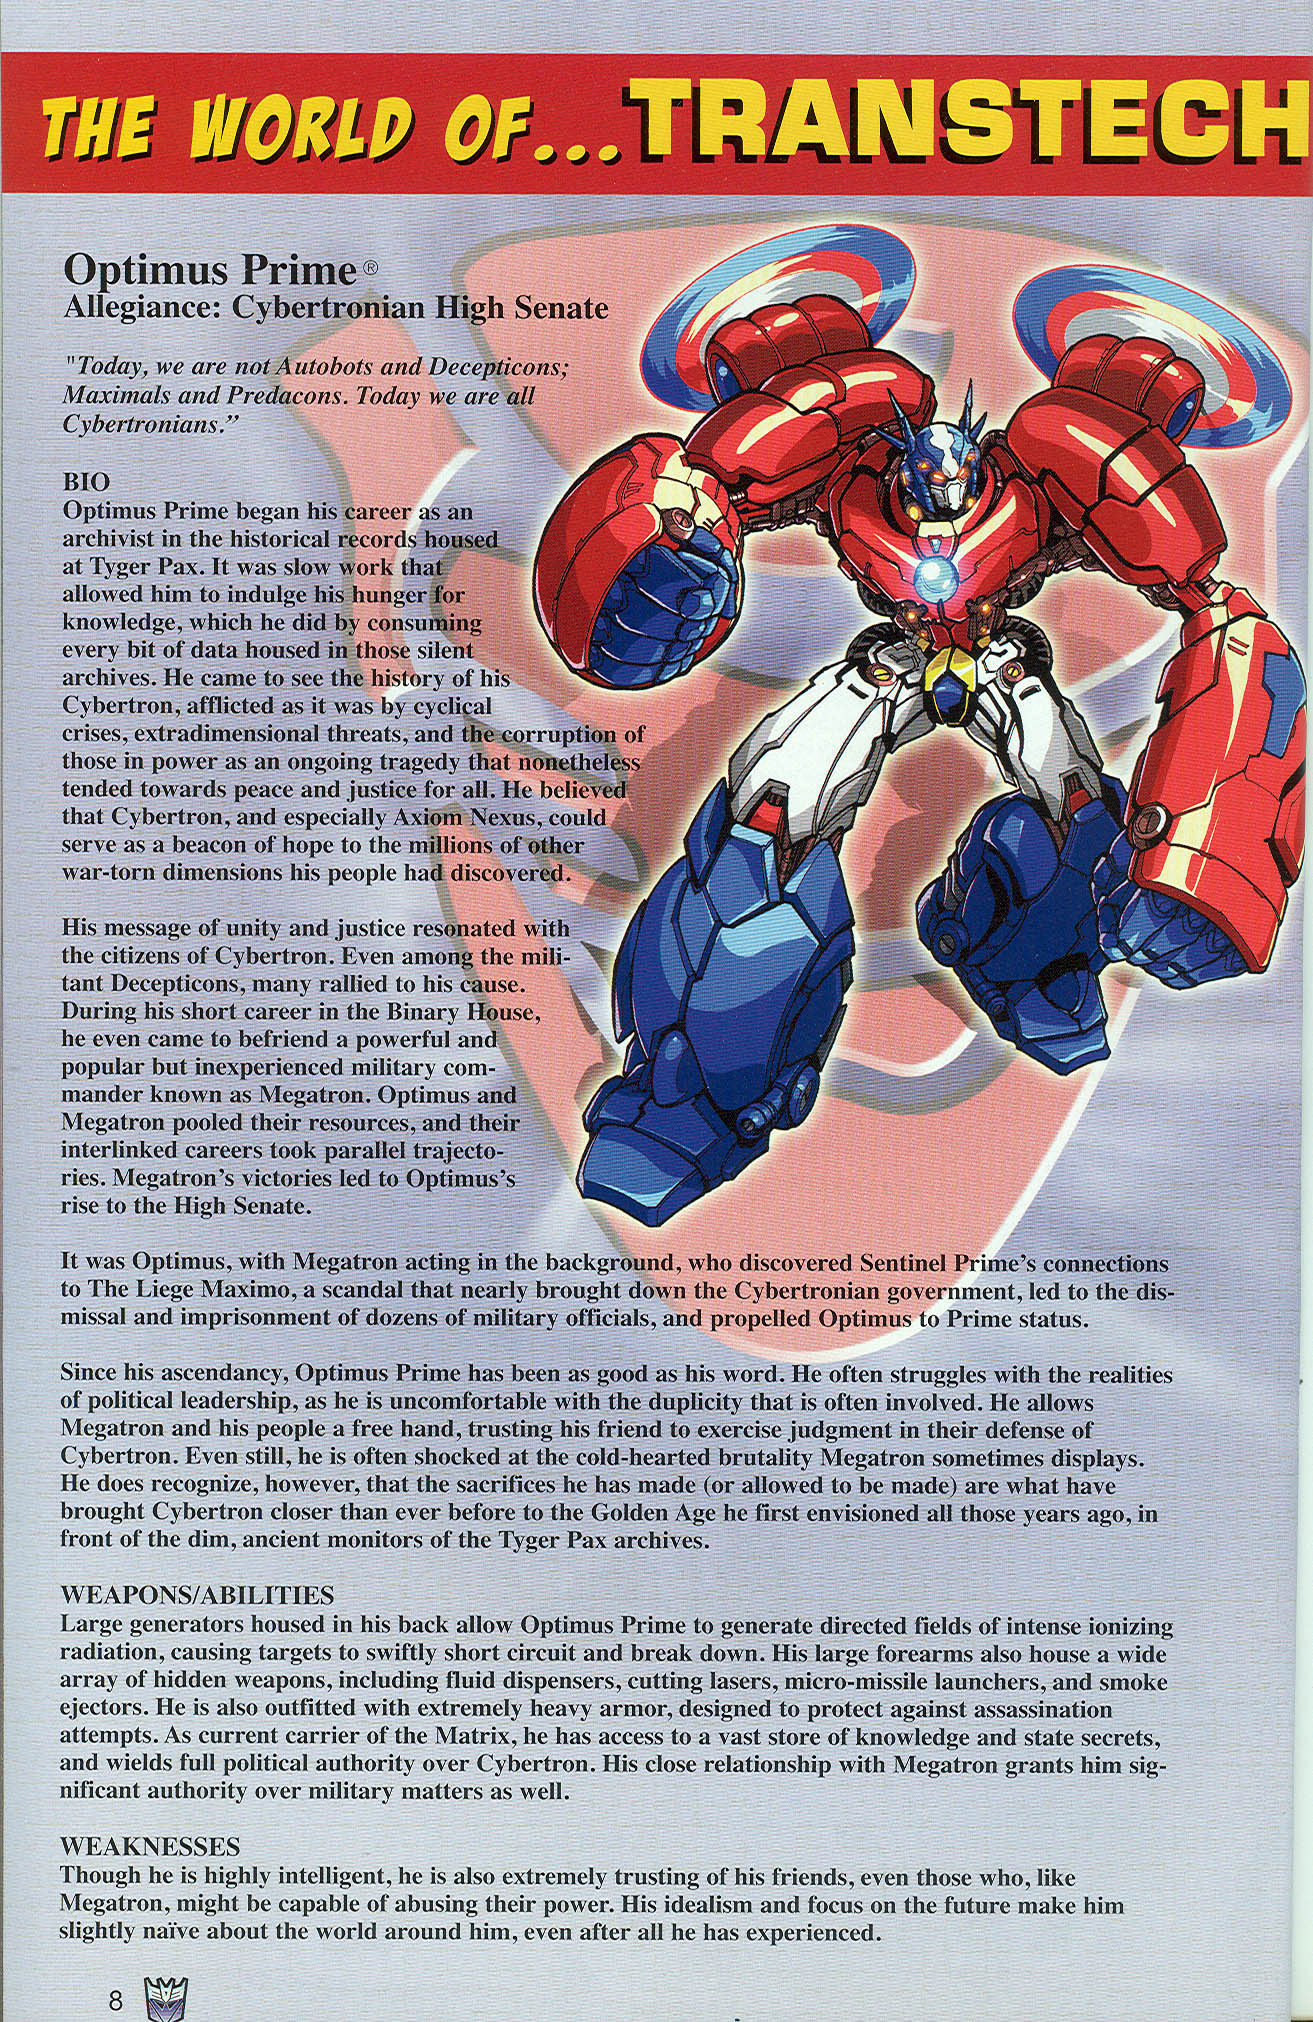 Read online Transformers: Collectors' Club comic -  Issue #24 - 8